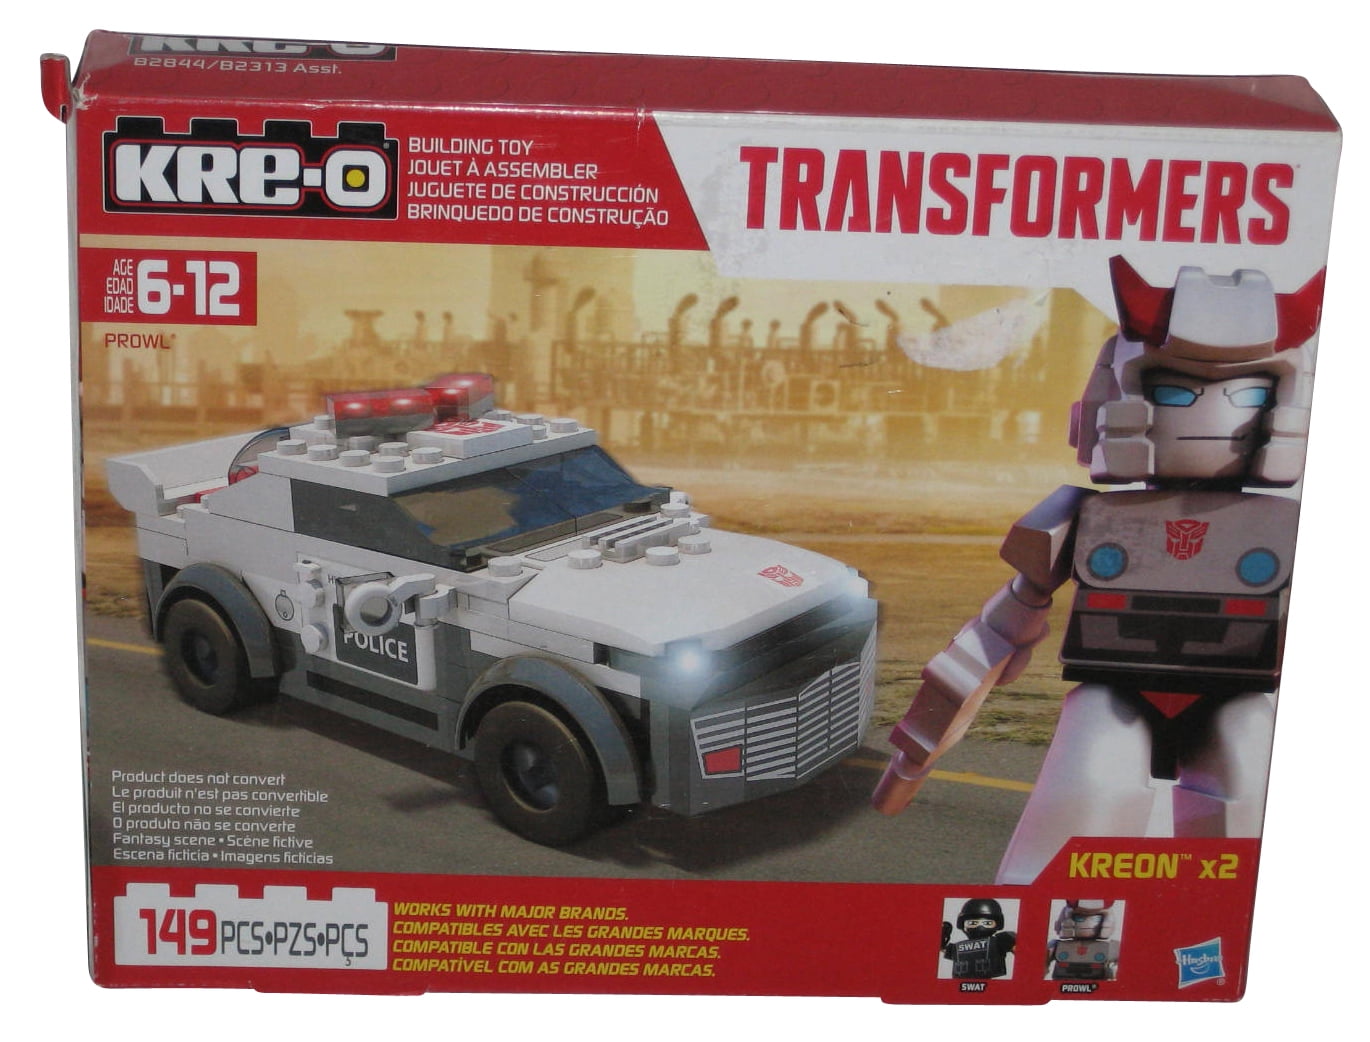 PROWL 149 pieces includes 2 Kreons Transformers Kre-o Building Toy Hasbro 2015 